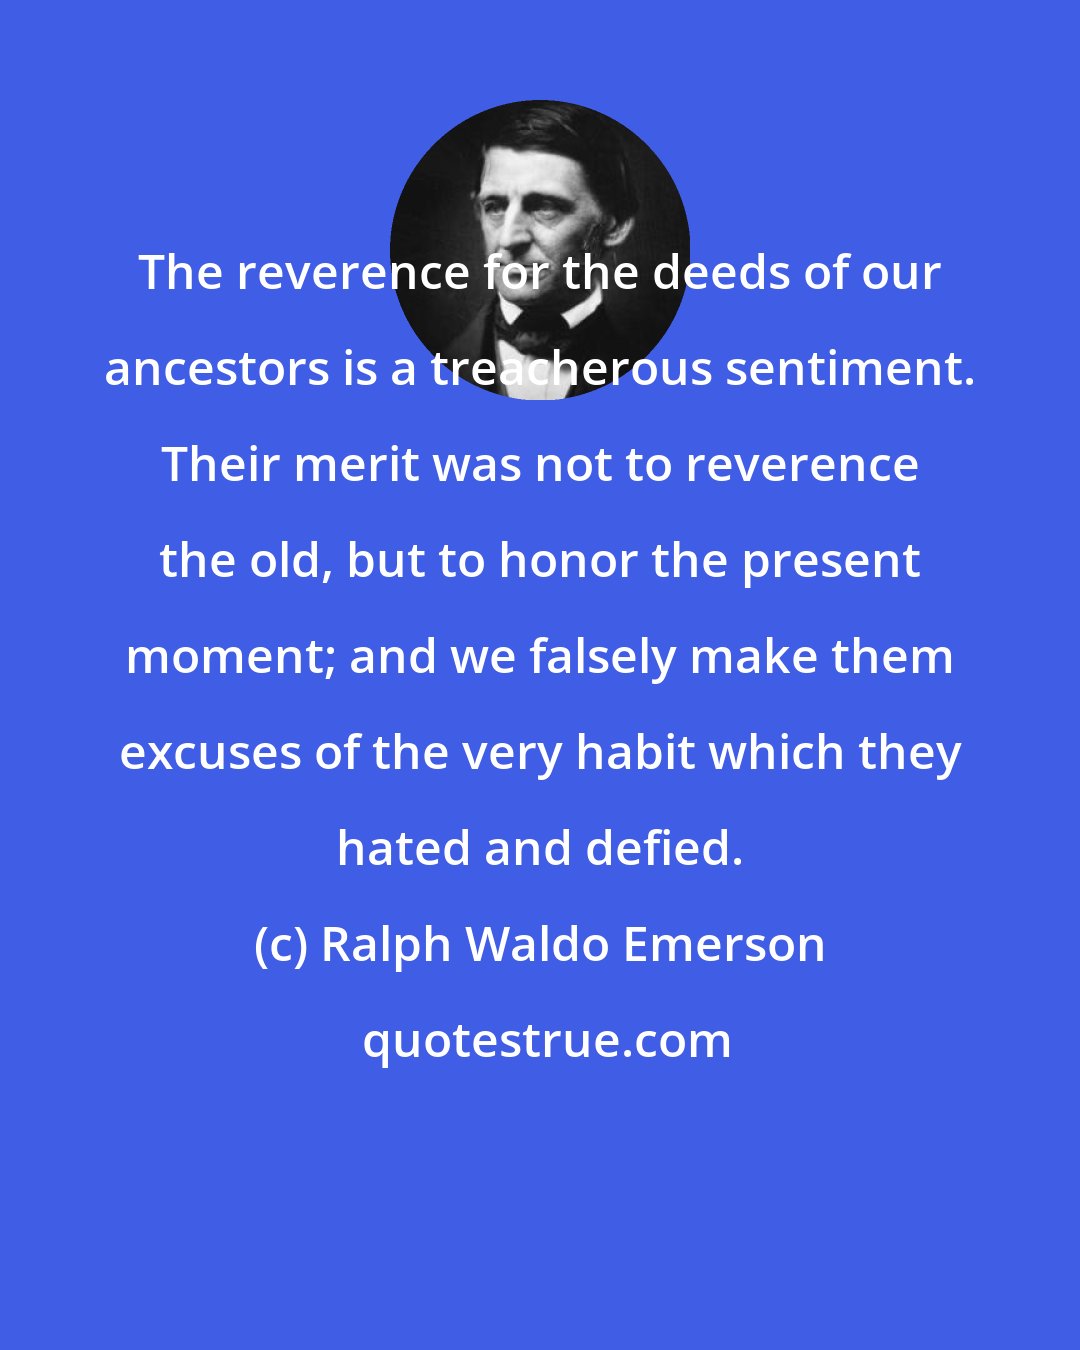 Ralph Waldo Emerson: The reverence for the deeds of our ancestors is a treacherous sentiment. Their merit was not to reverence the old, but to honor the present moment; and we falsely make them excuses of the very habit which they hated and defied.